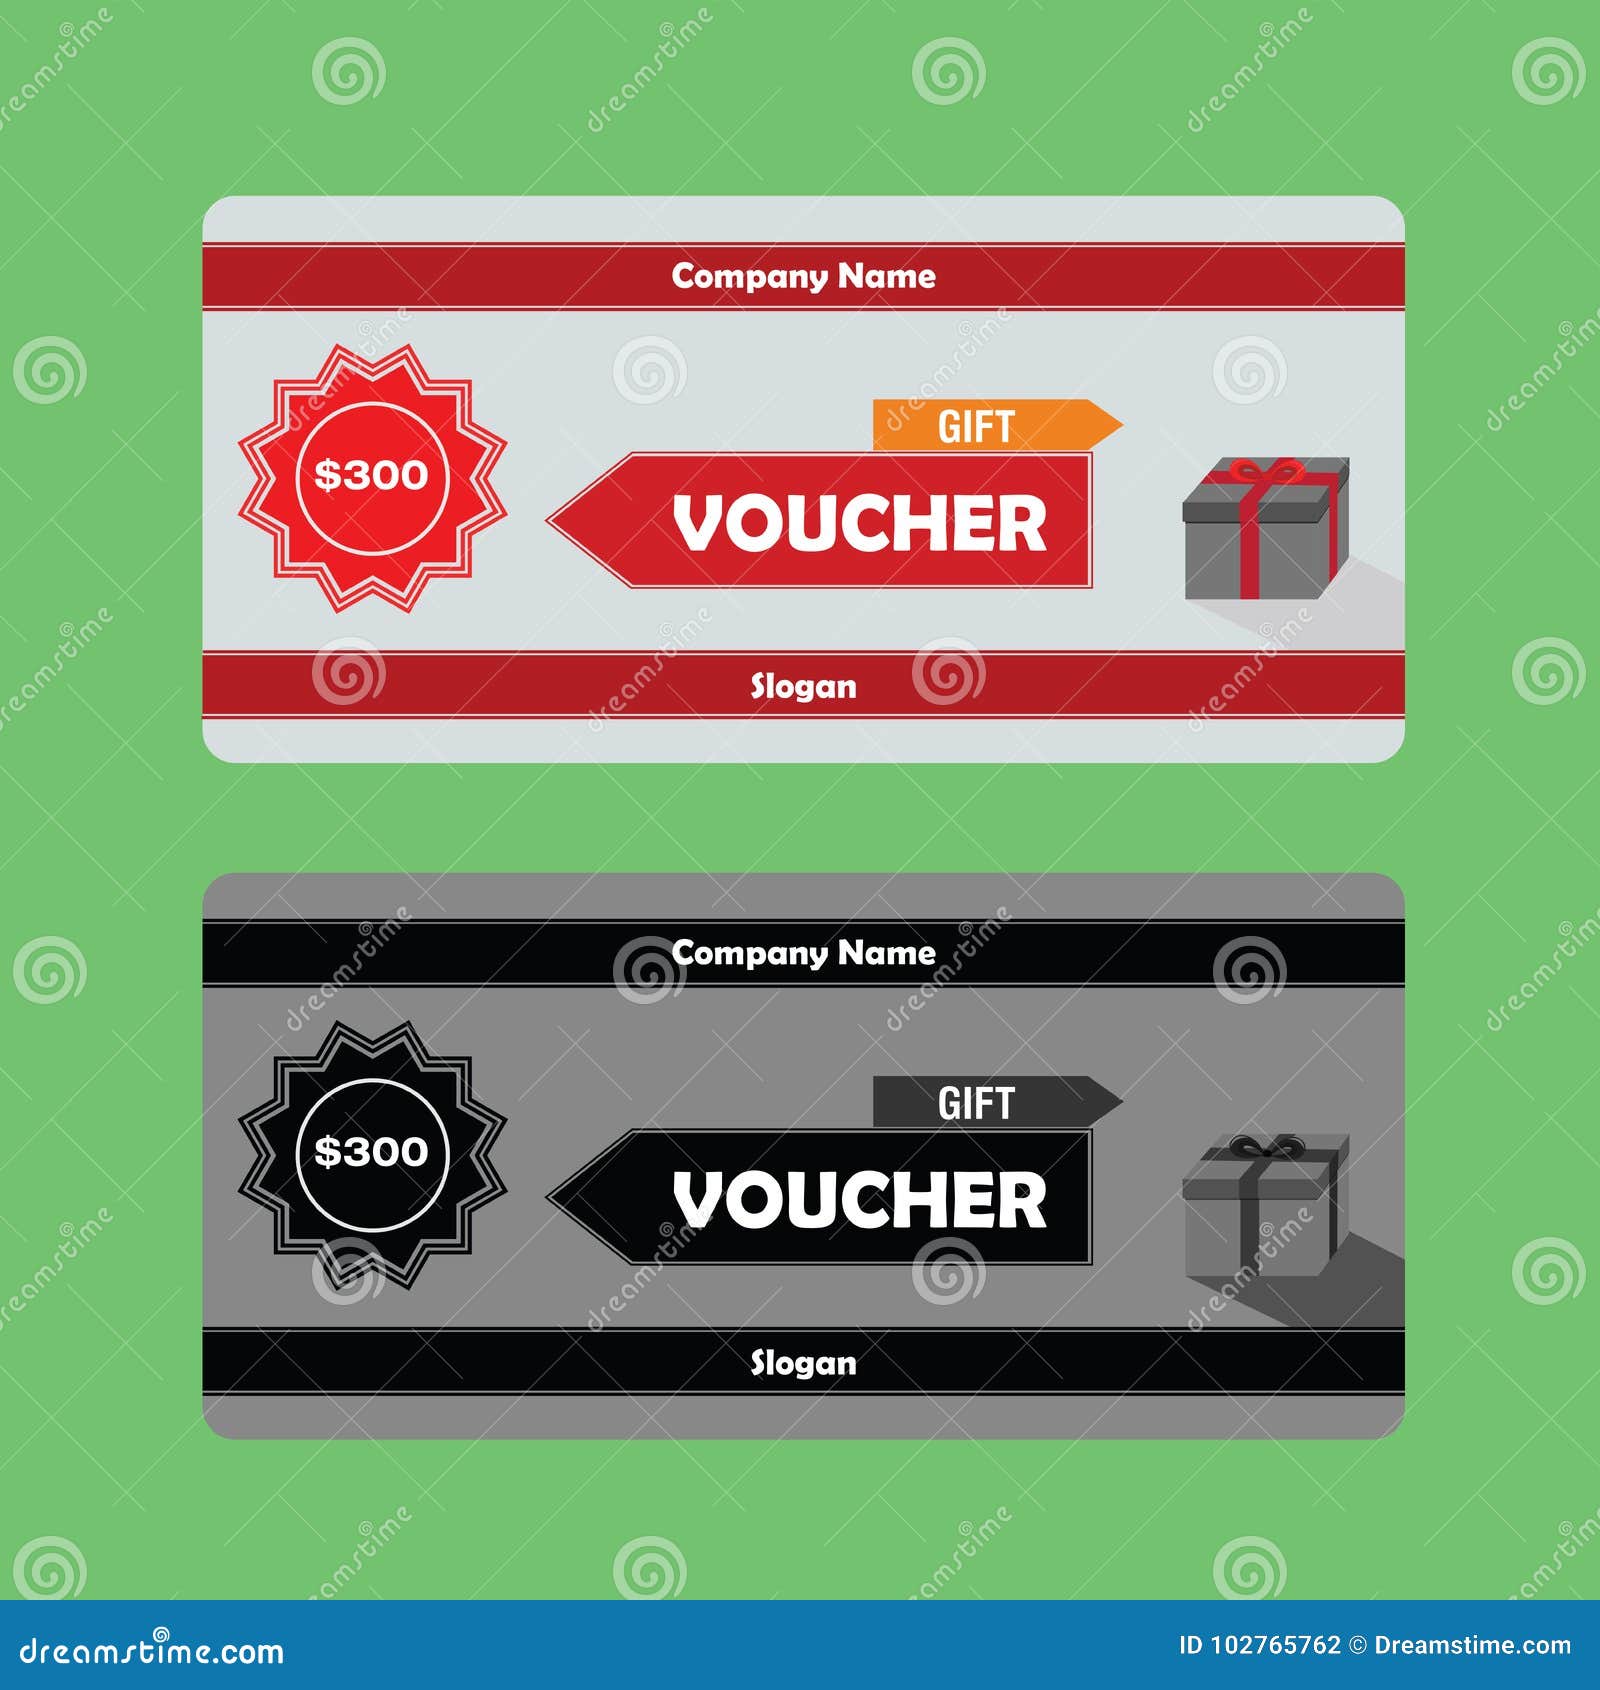 gift voucher template with red theme usable for gift coupon